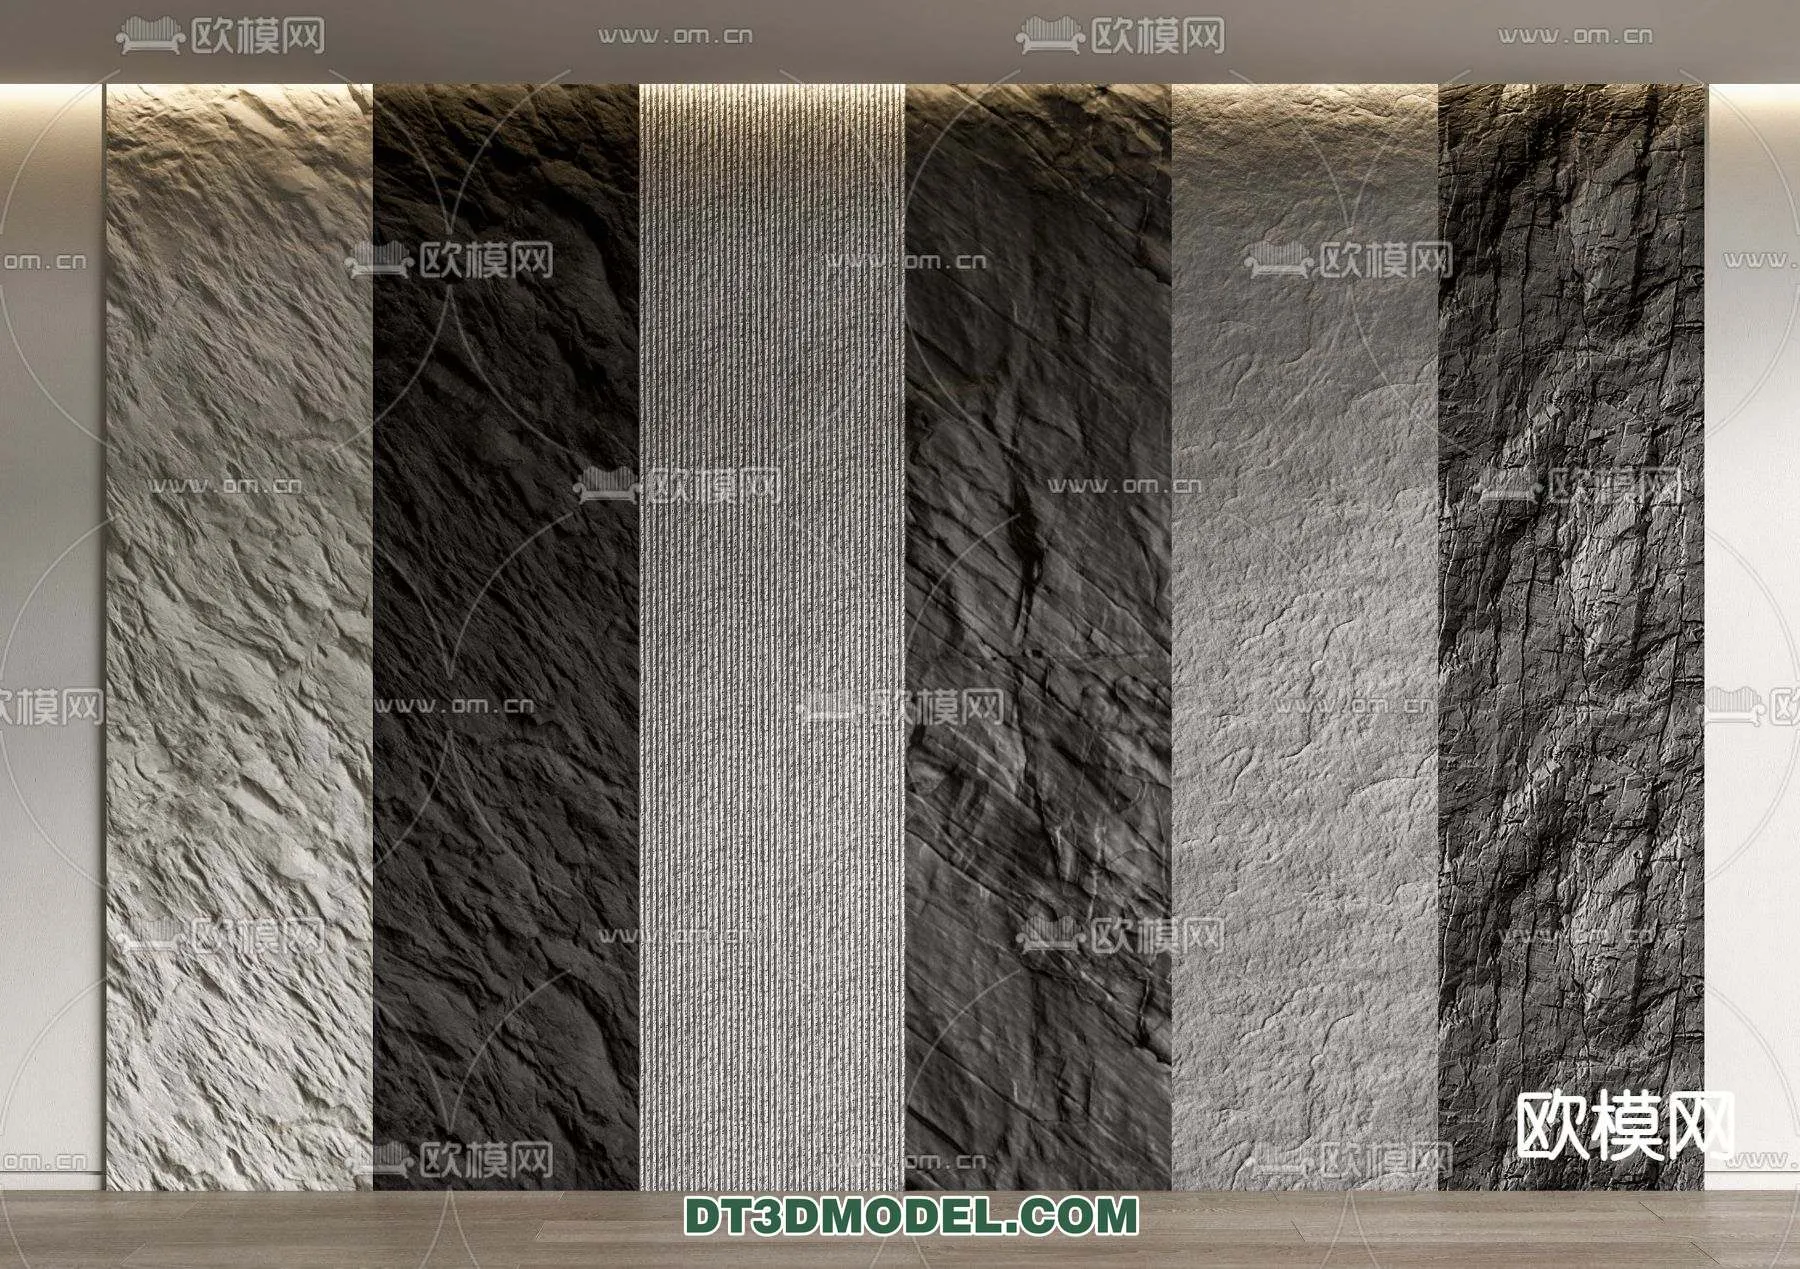 MATERIAL – TEXTURES – ROCK WALL – 0028